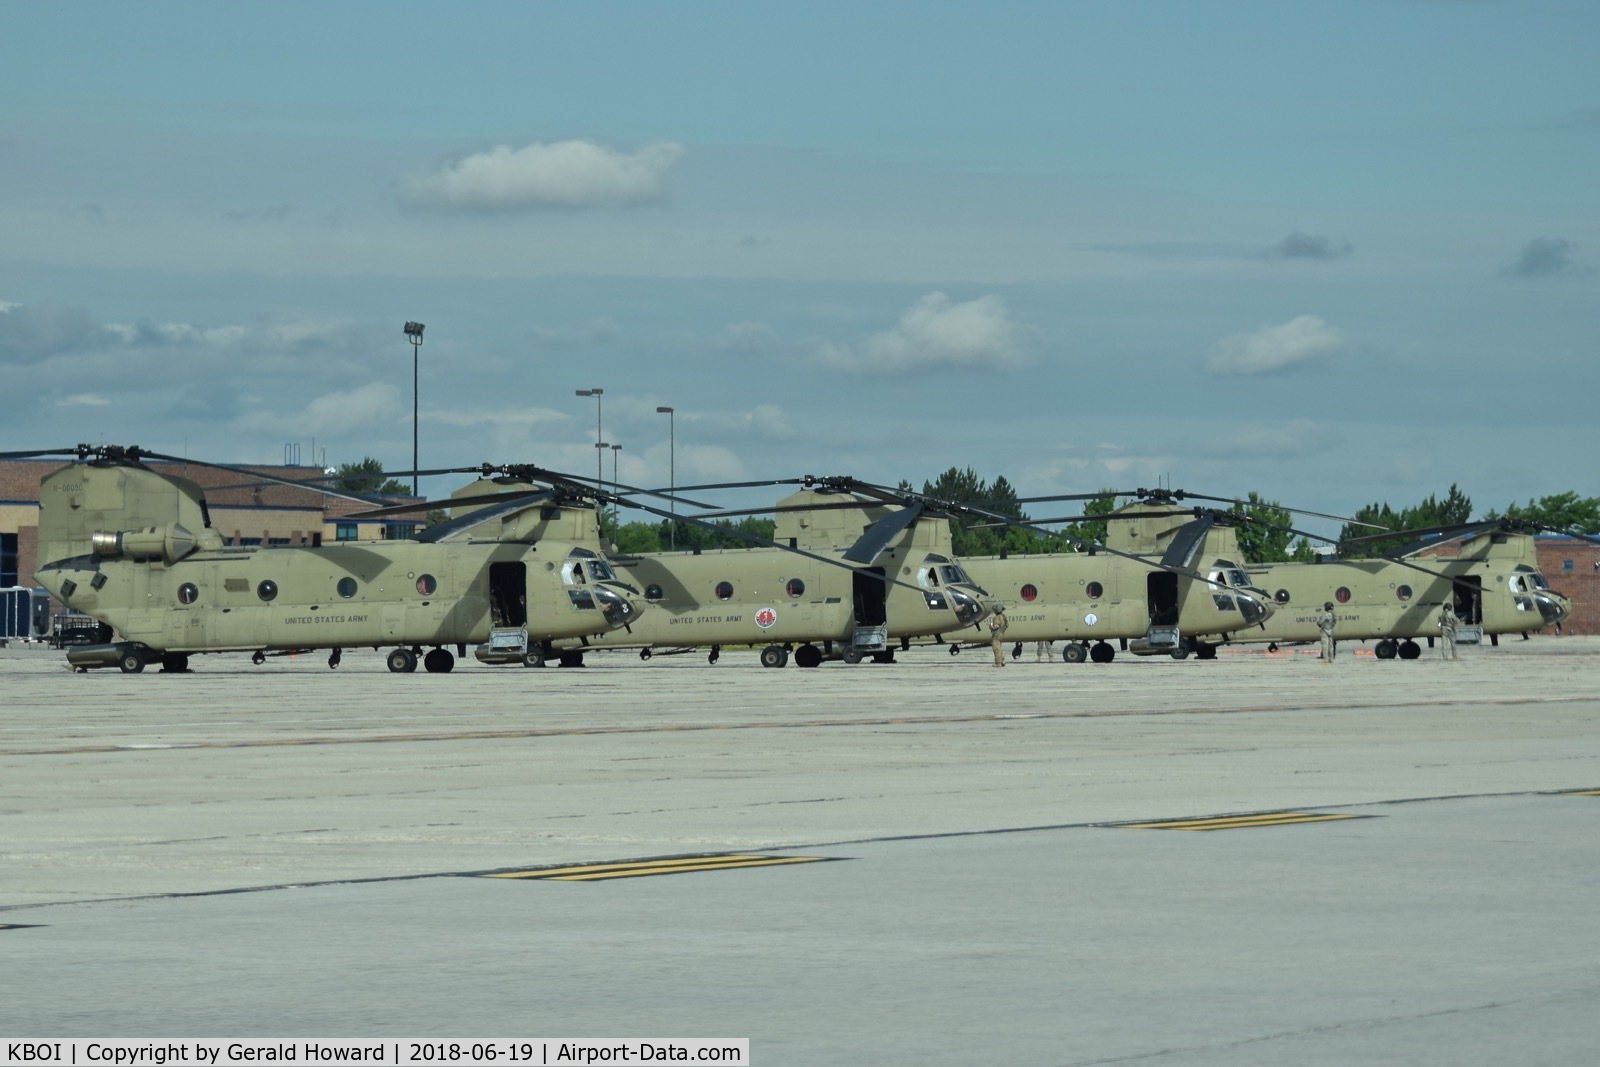 Boise Air Terminal/gowen Fld Airport (BOI) - CH-47Fs from the Washington Army national Guard training from the Idaho ANG ramp.